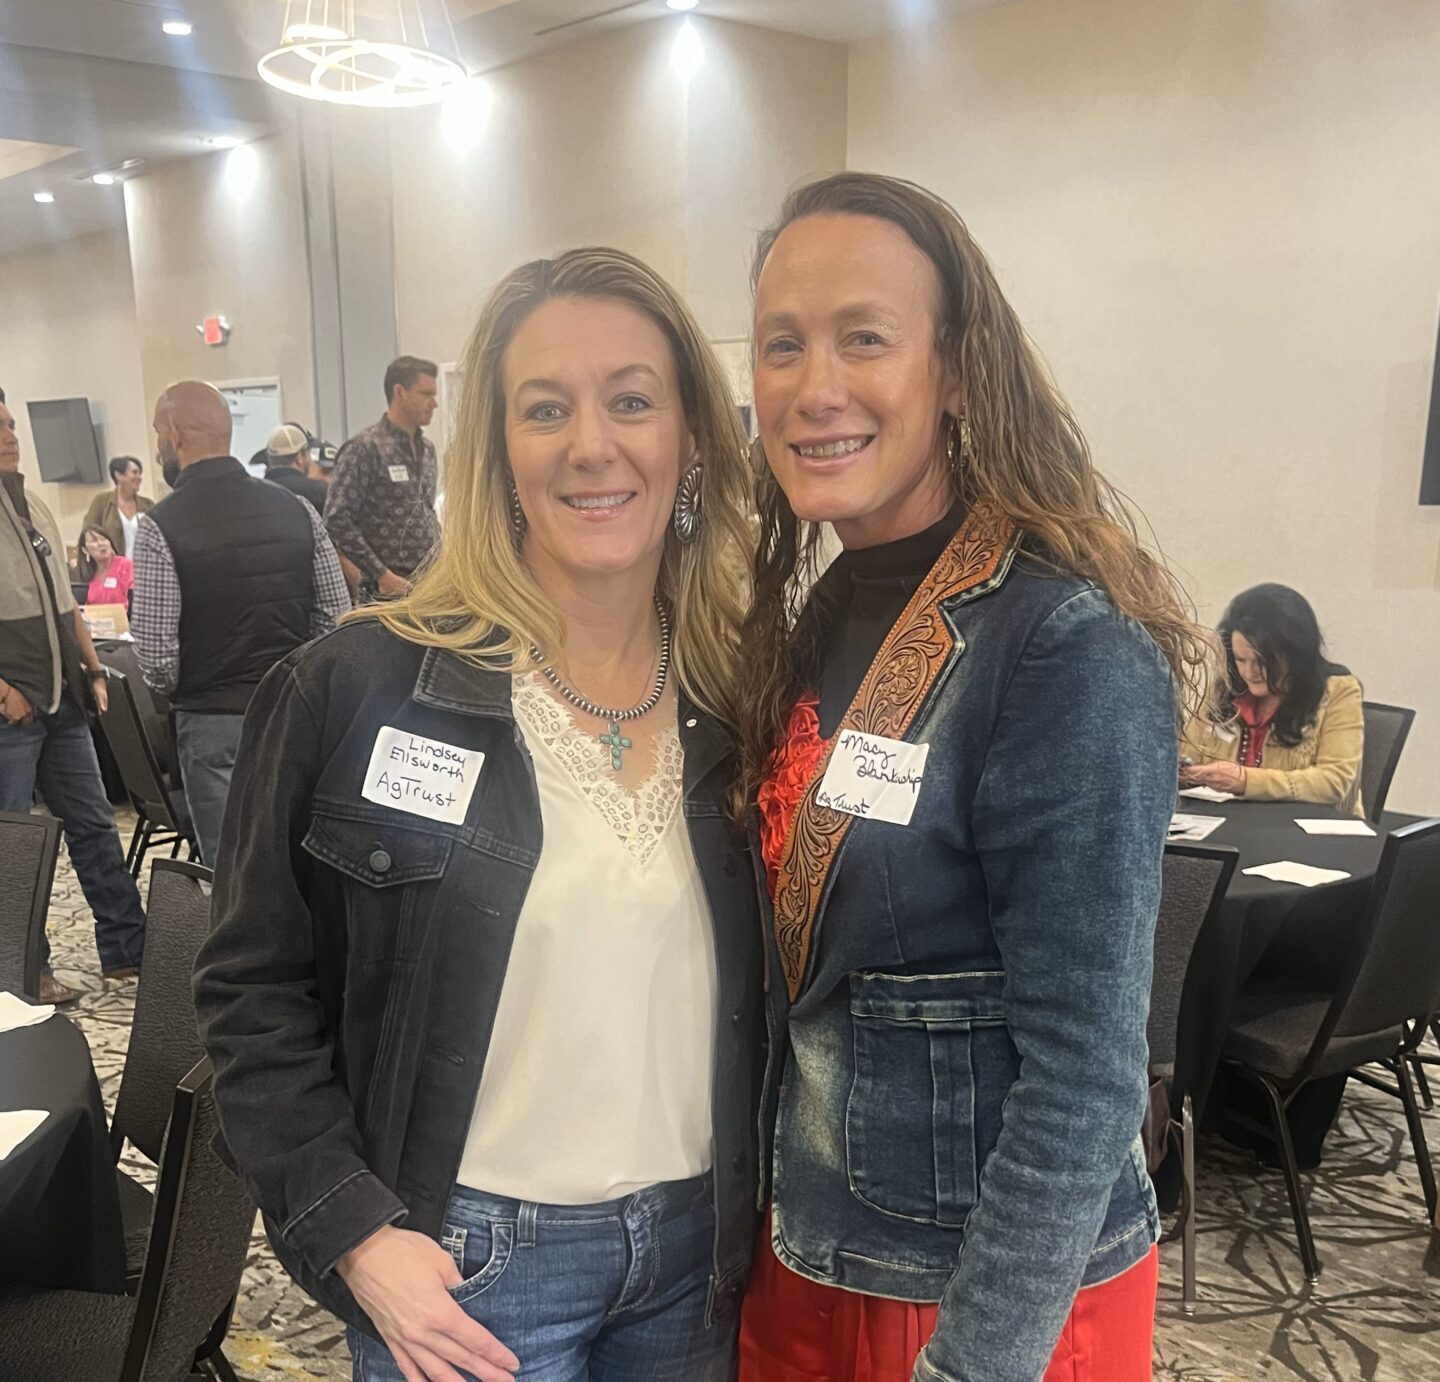 Lindsey Ellsworth and Macy Blankenship at Texas Alliance of Land Brokers Luncheon